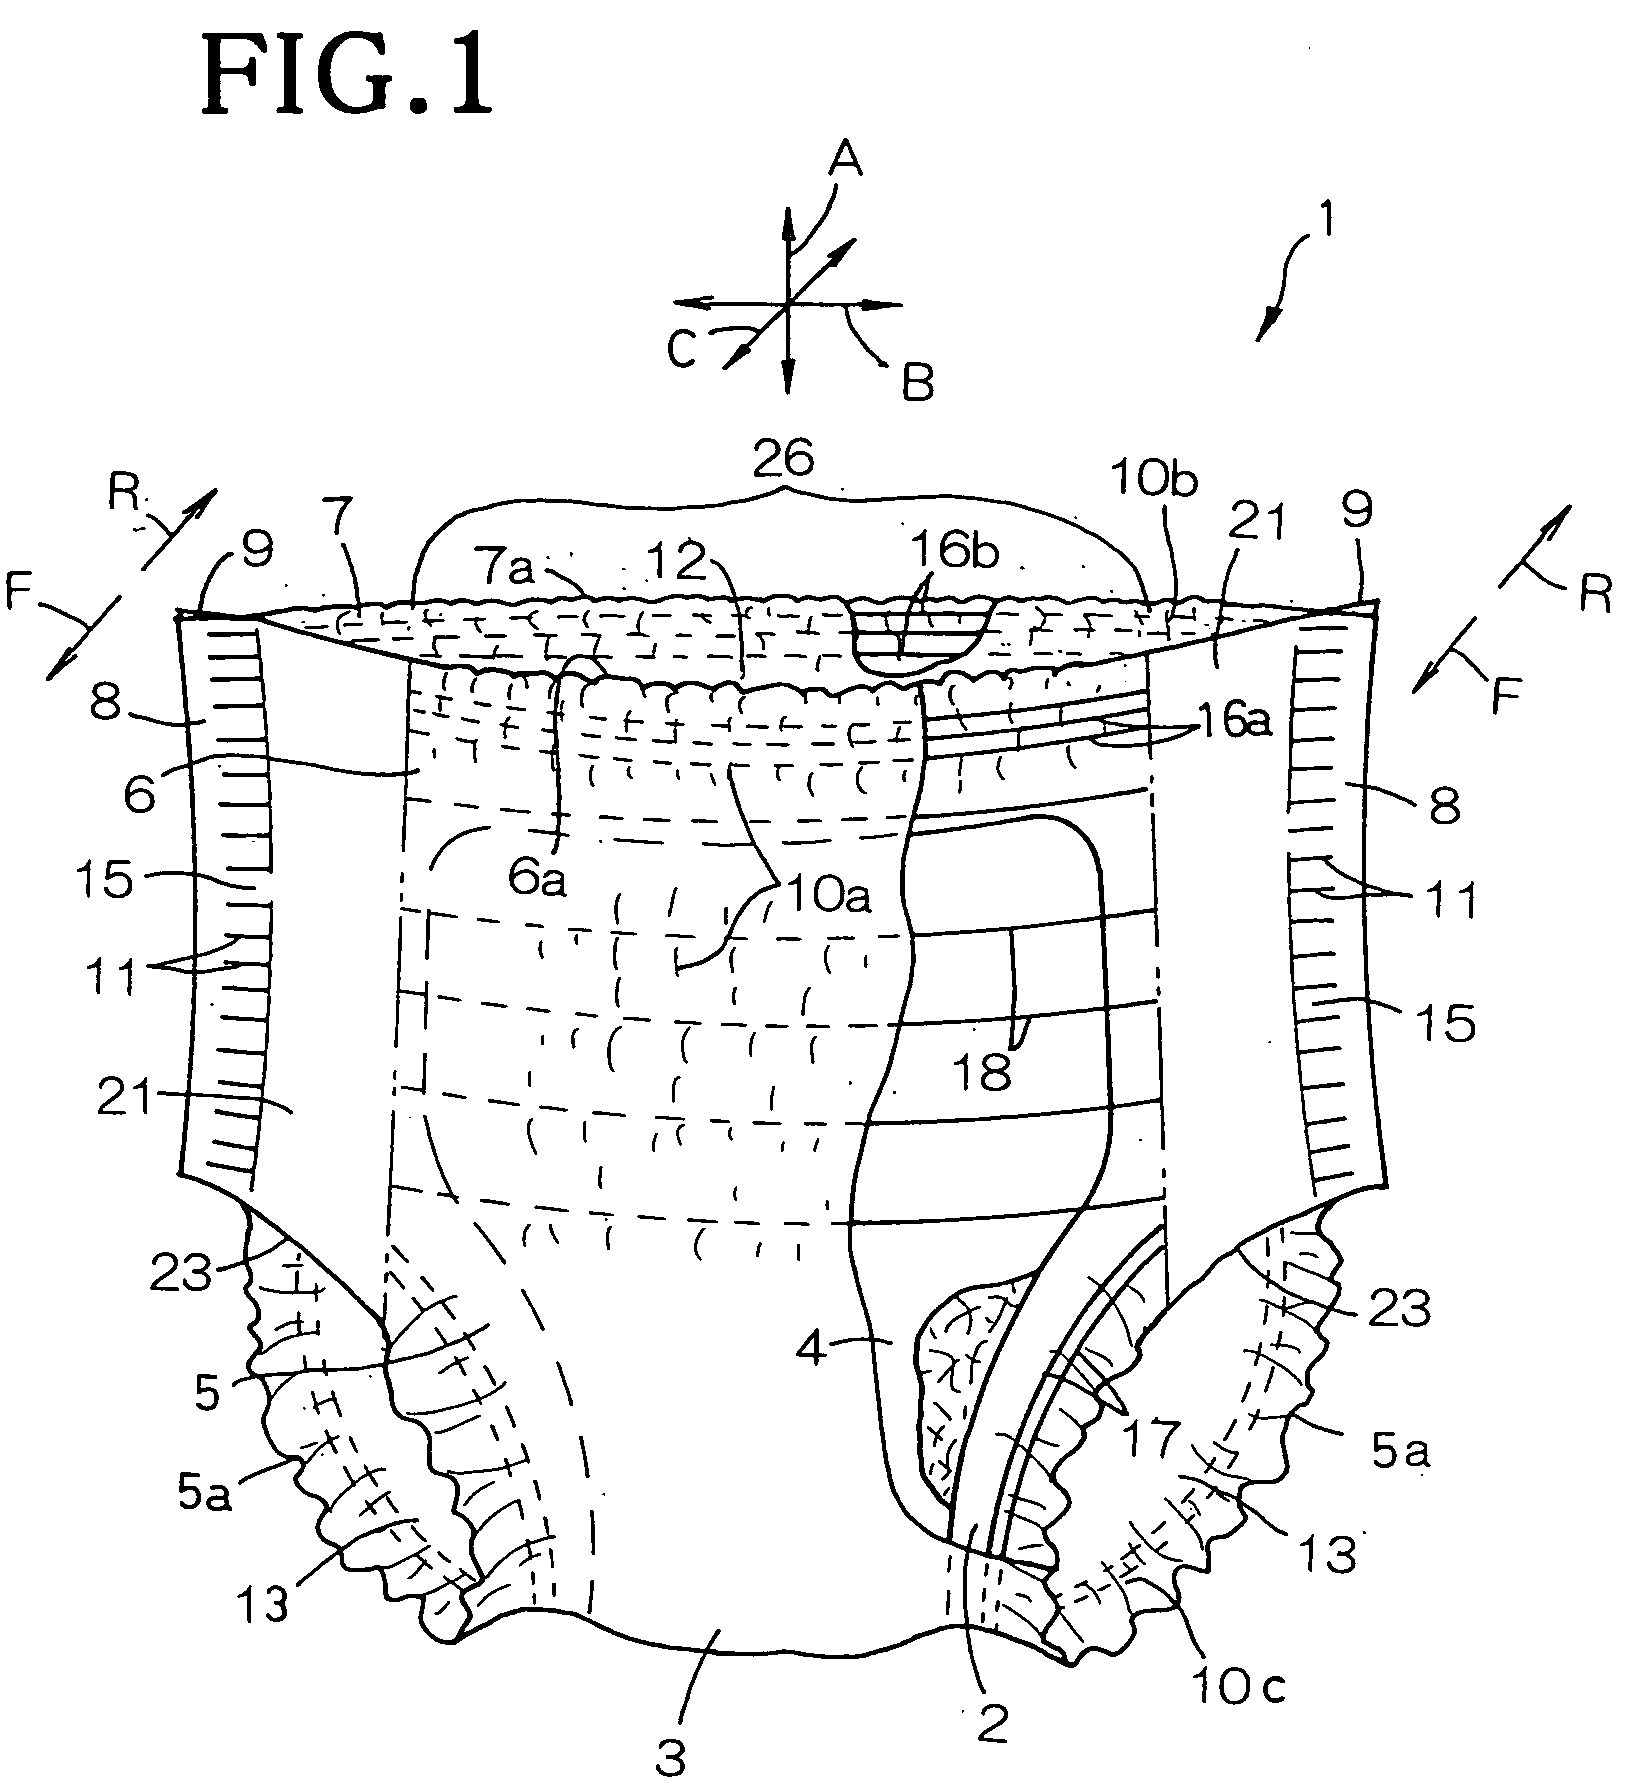 Pull-on disposable wearing article